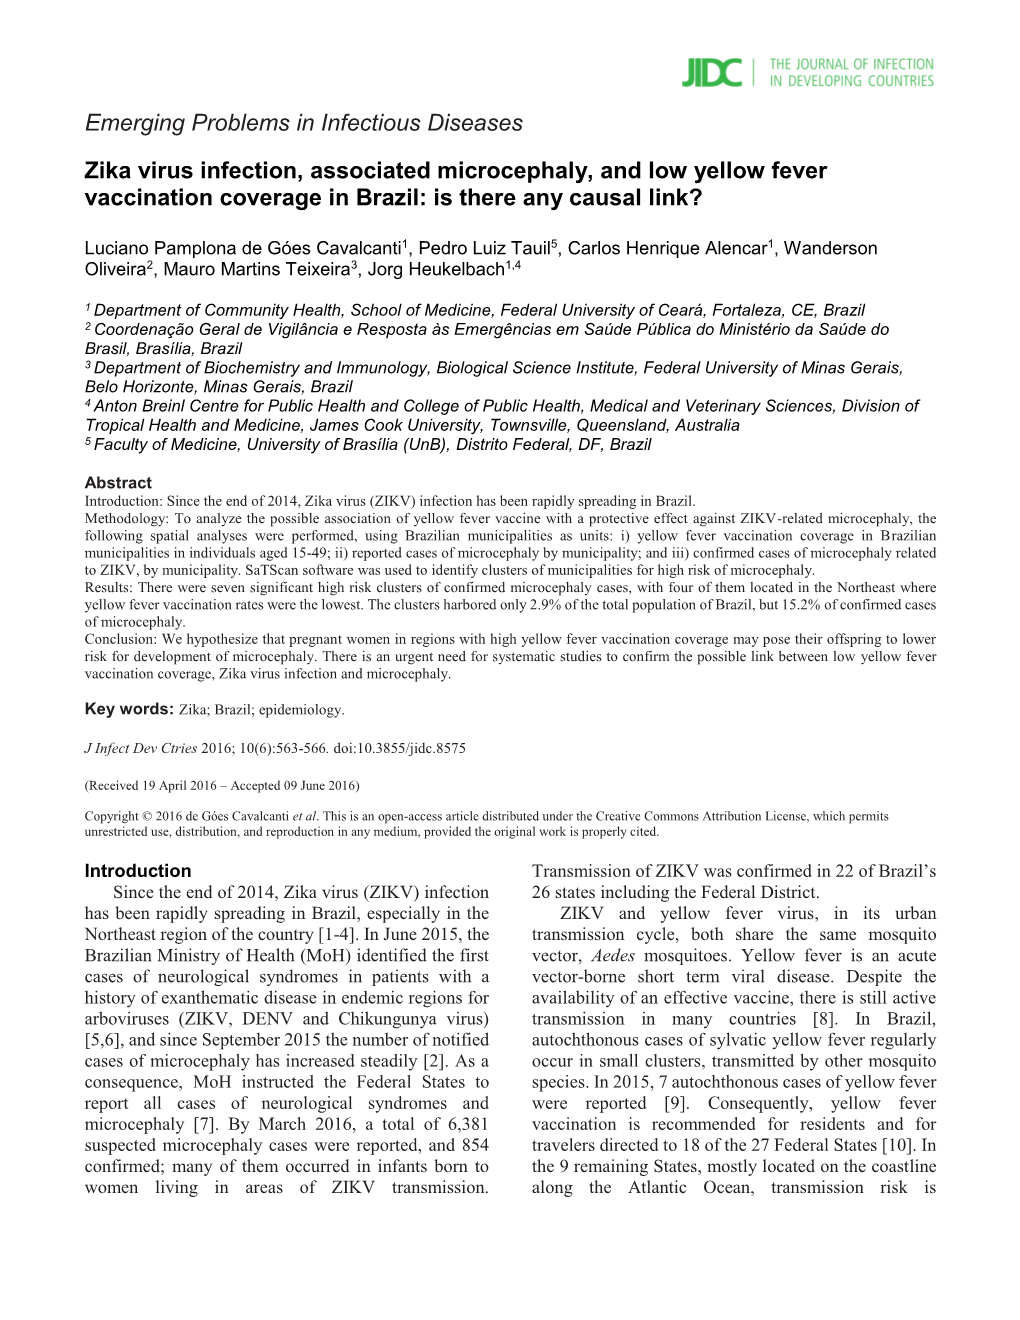 Zika Virus Infection, Associated Microcephaly, and Low Yellow Fever Vaccination Coverage in Brazil: Is There Any Causal Link?